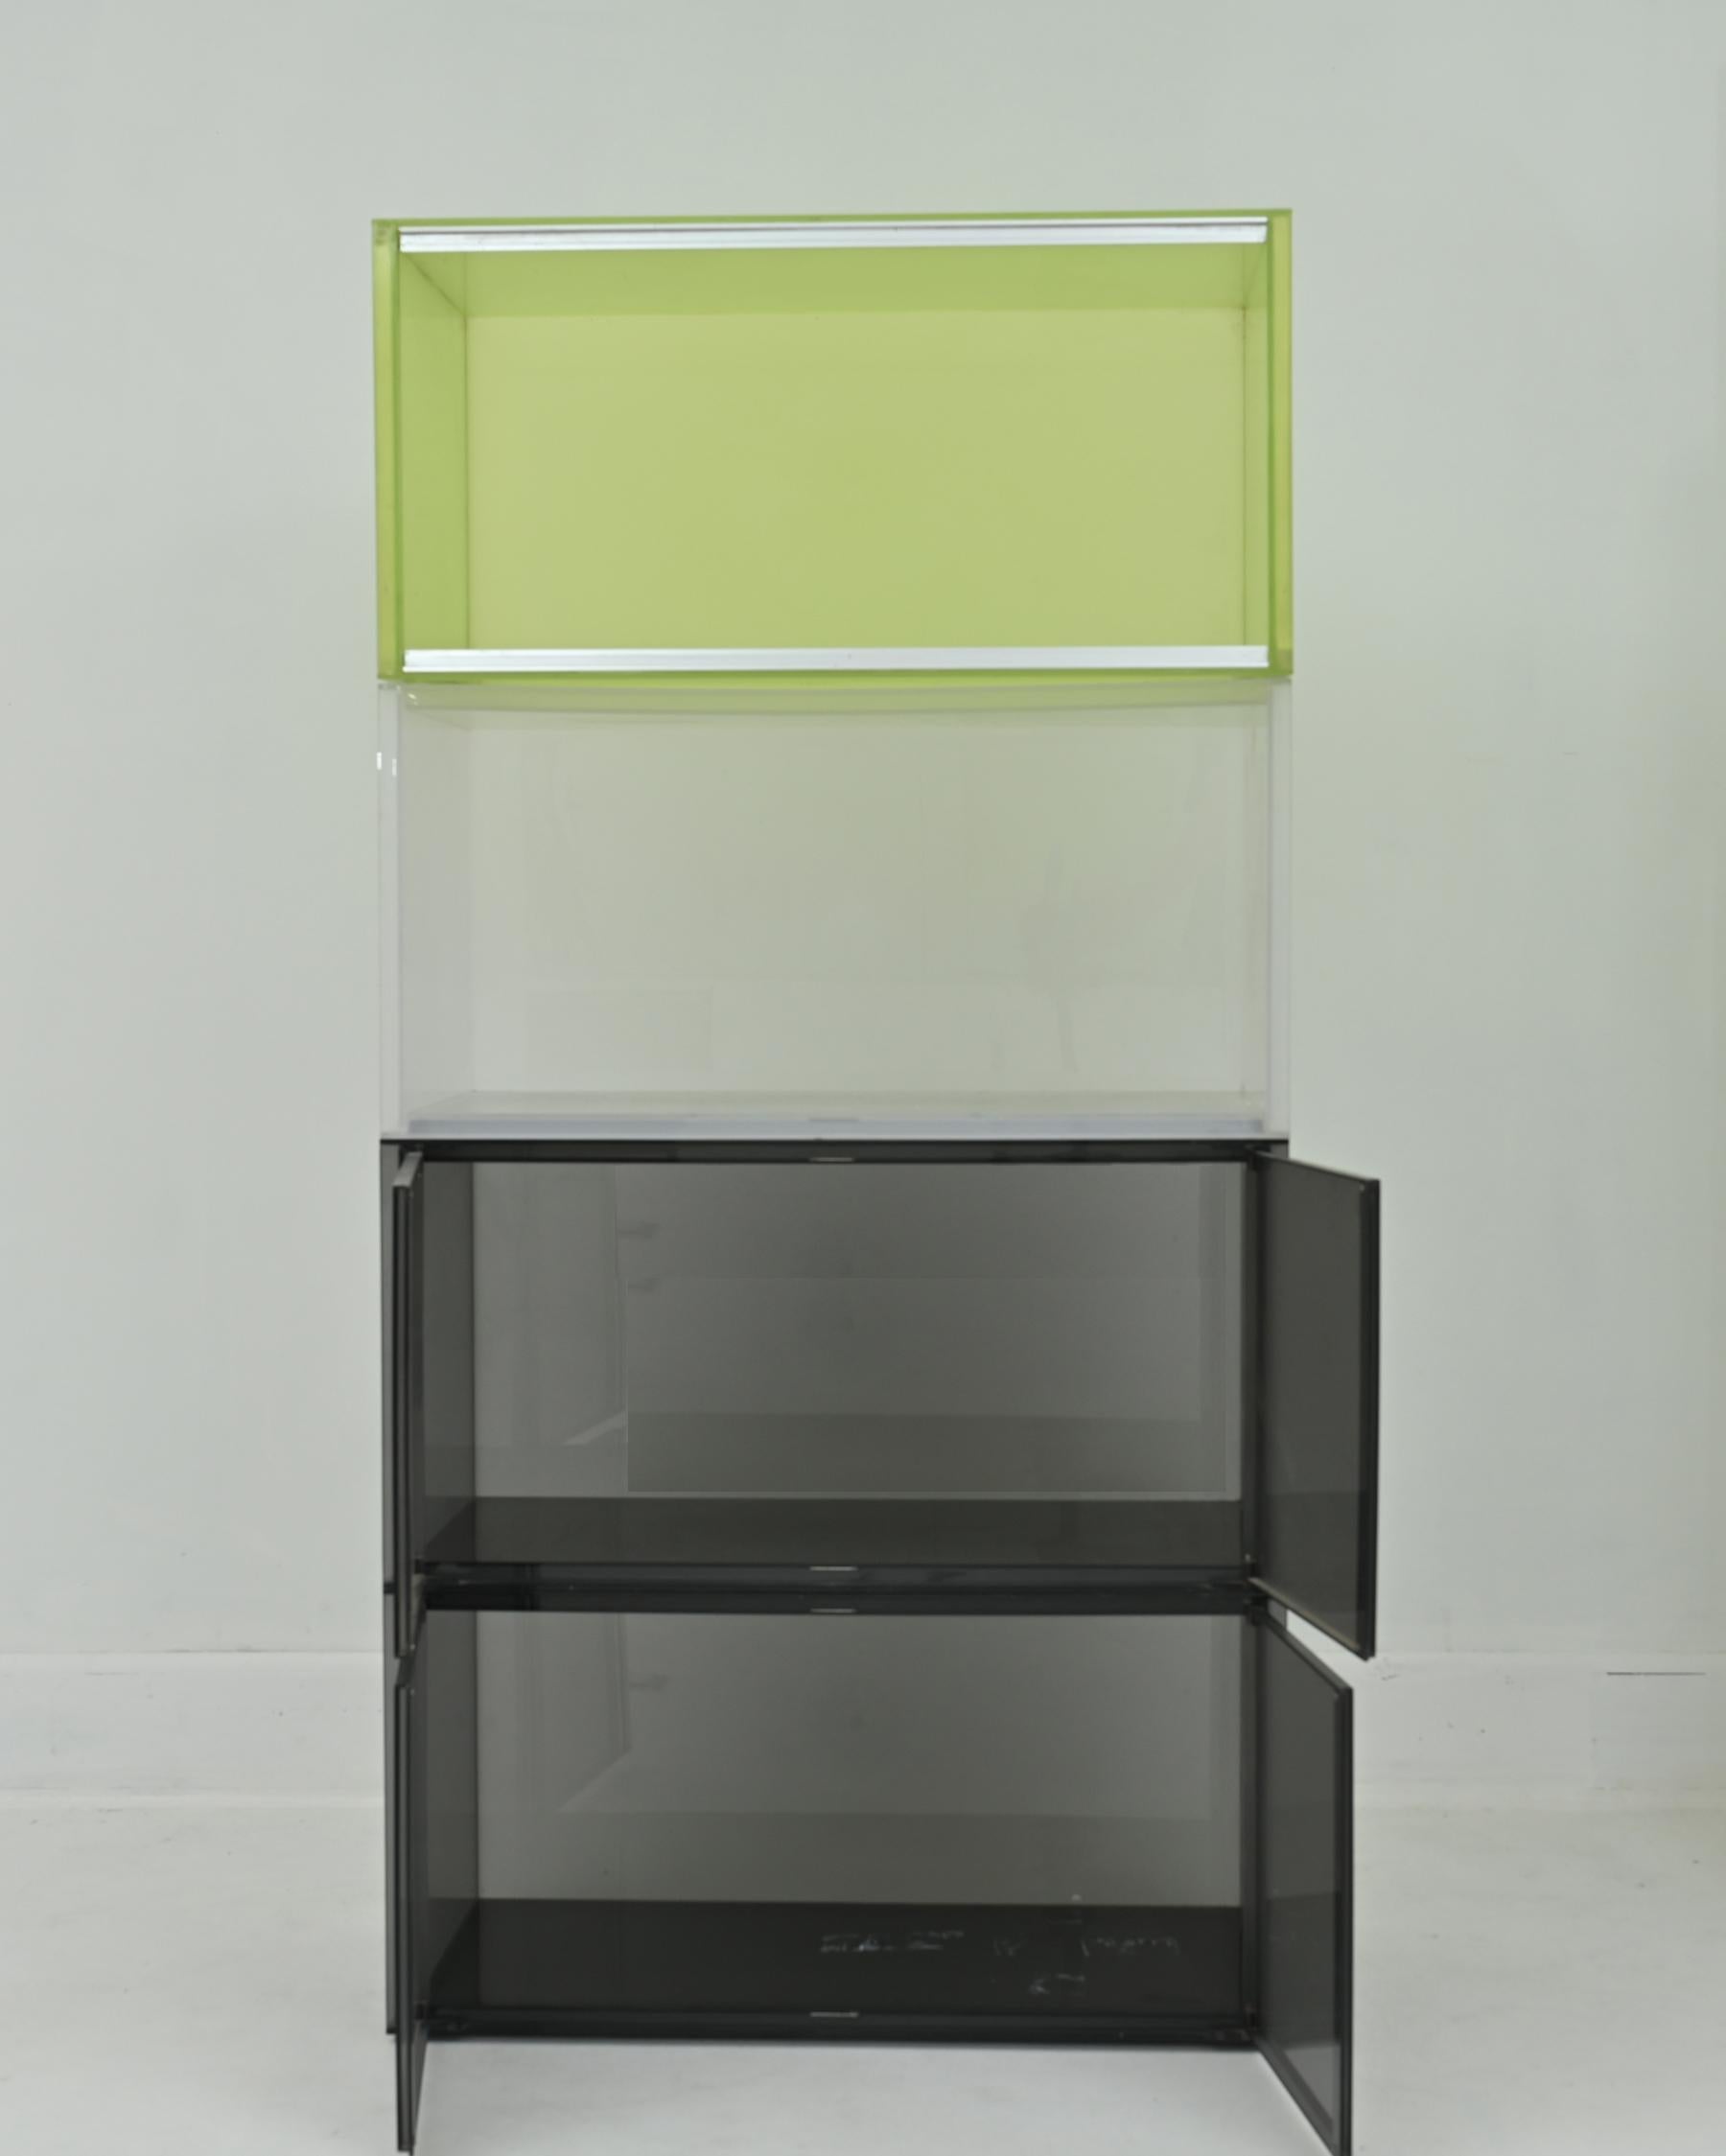 1990s Acrylic Resin and Steel “One” Wall Unit by Piero Lissoni for Kartell For Sale 7